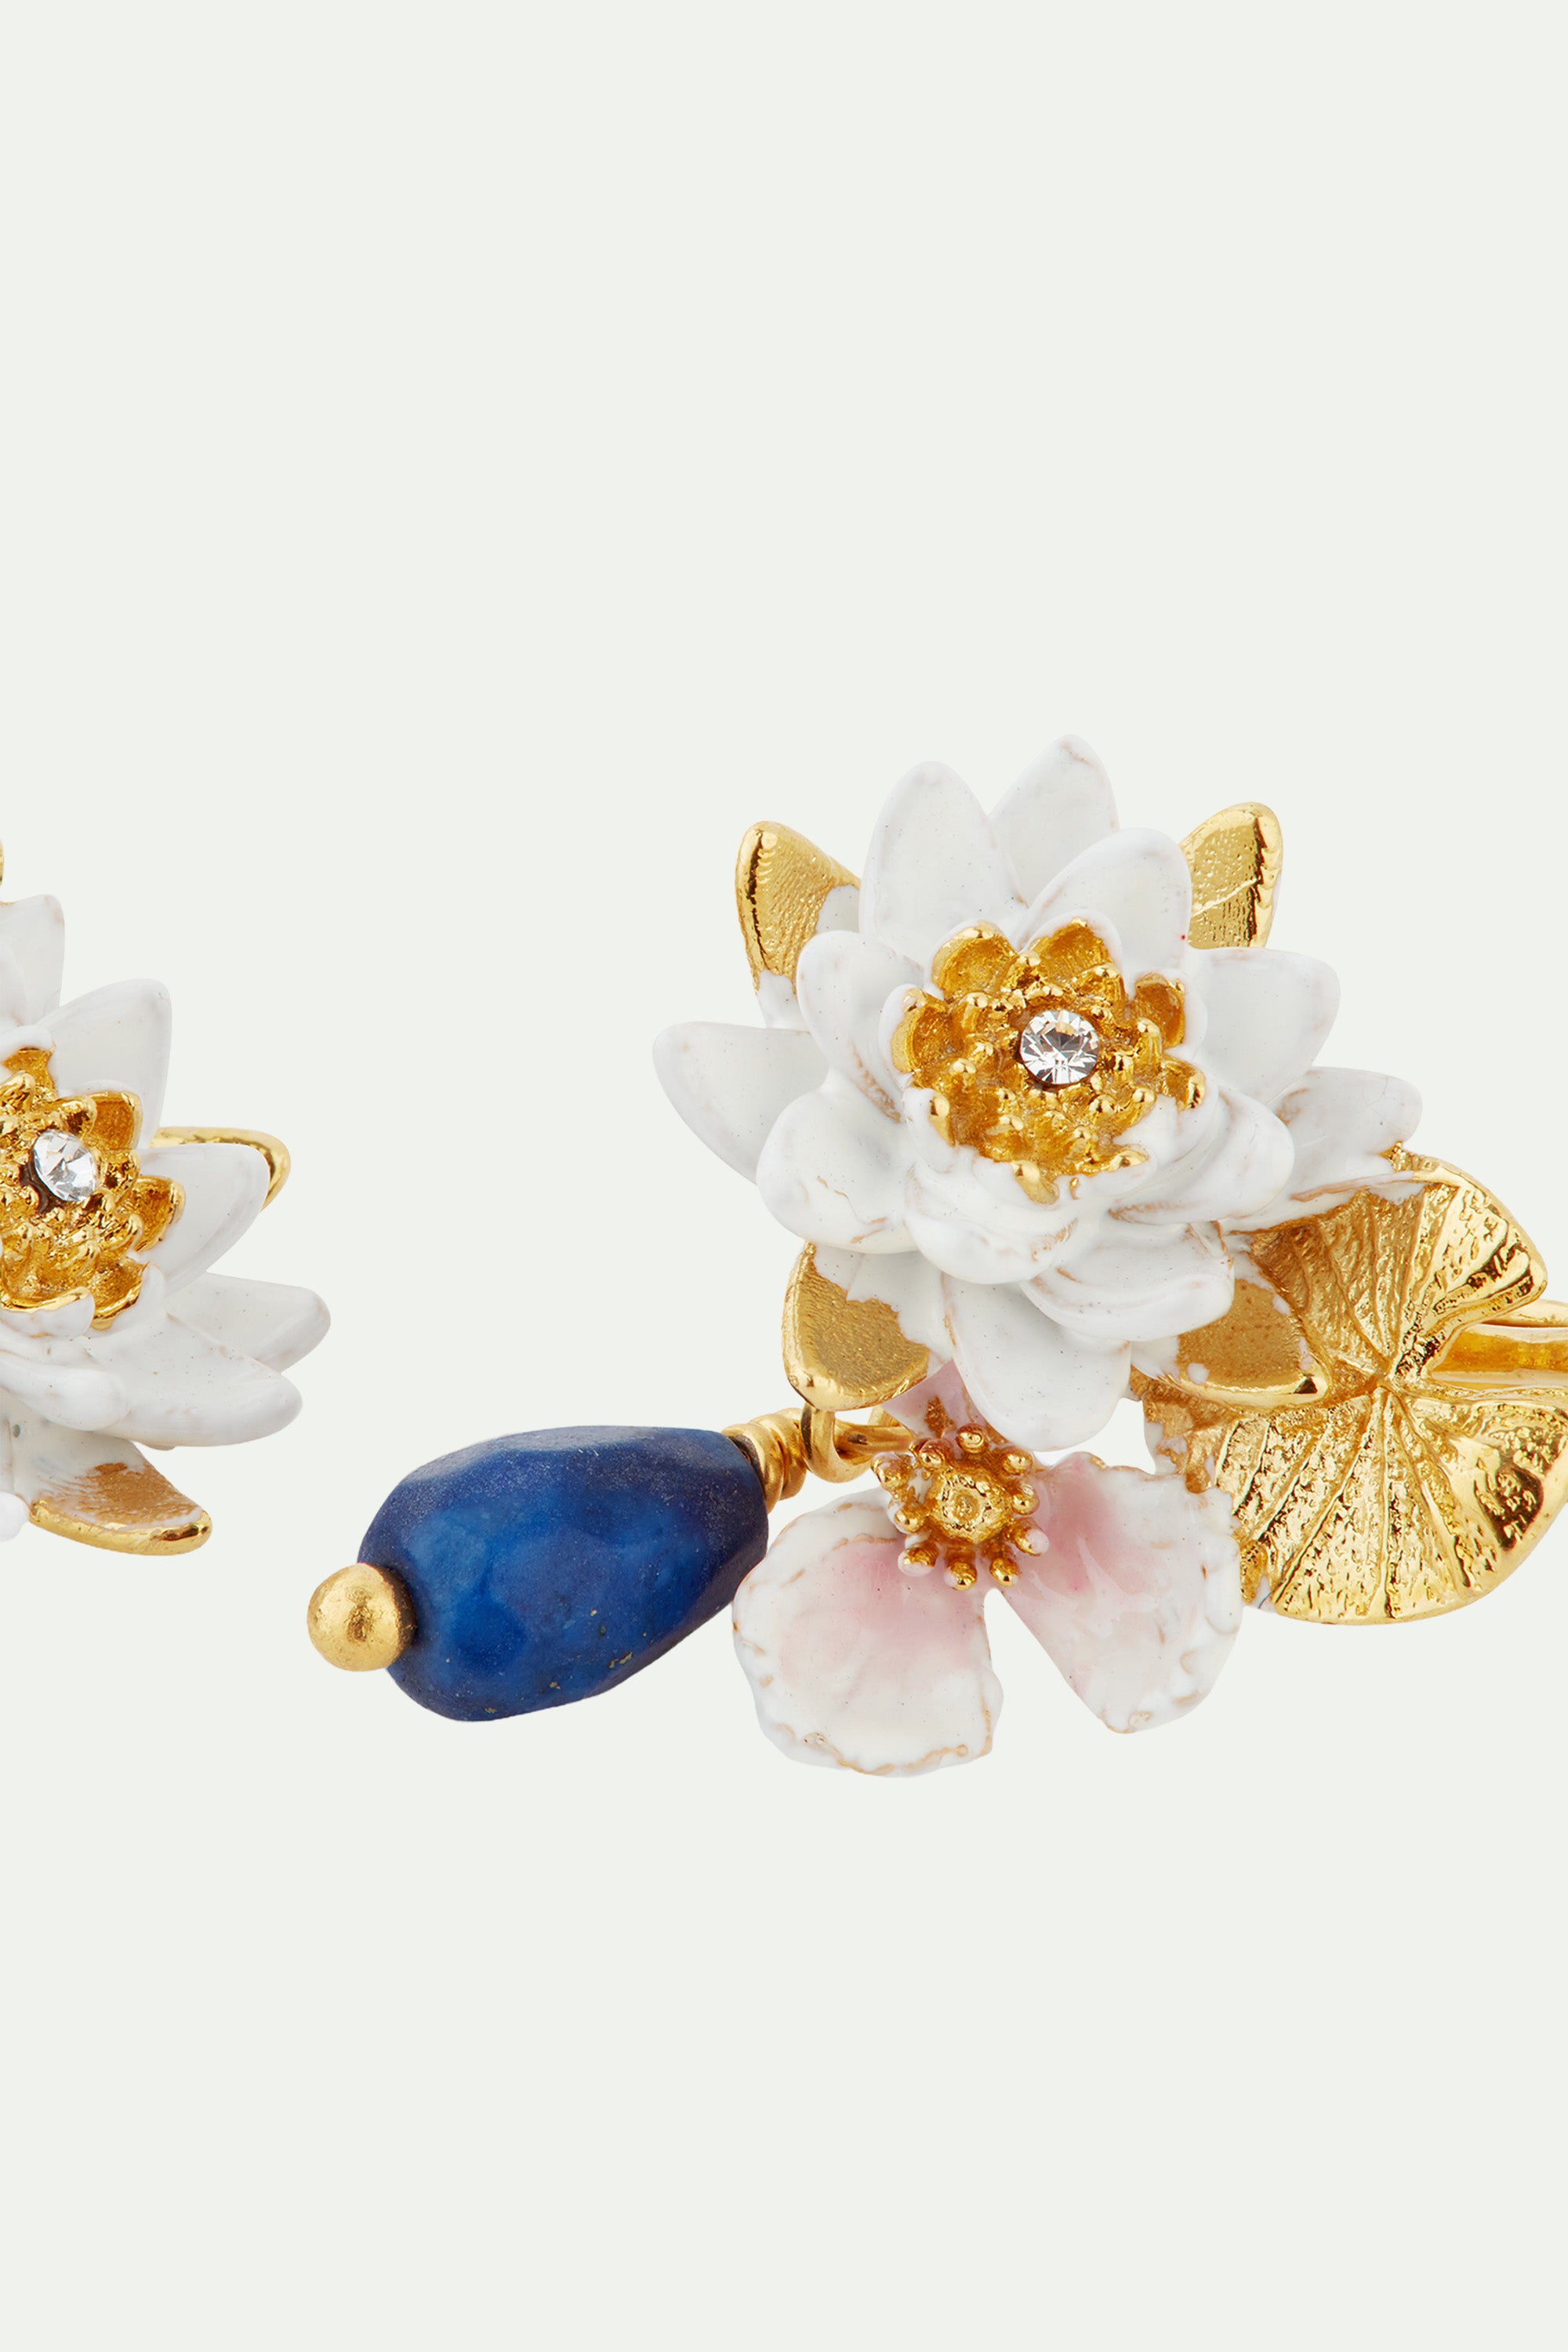 White water lily and lapis lazuli sleeper earrings